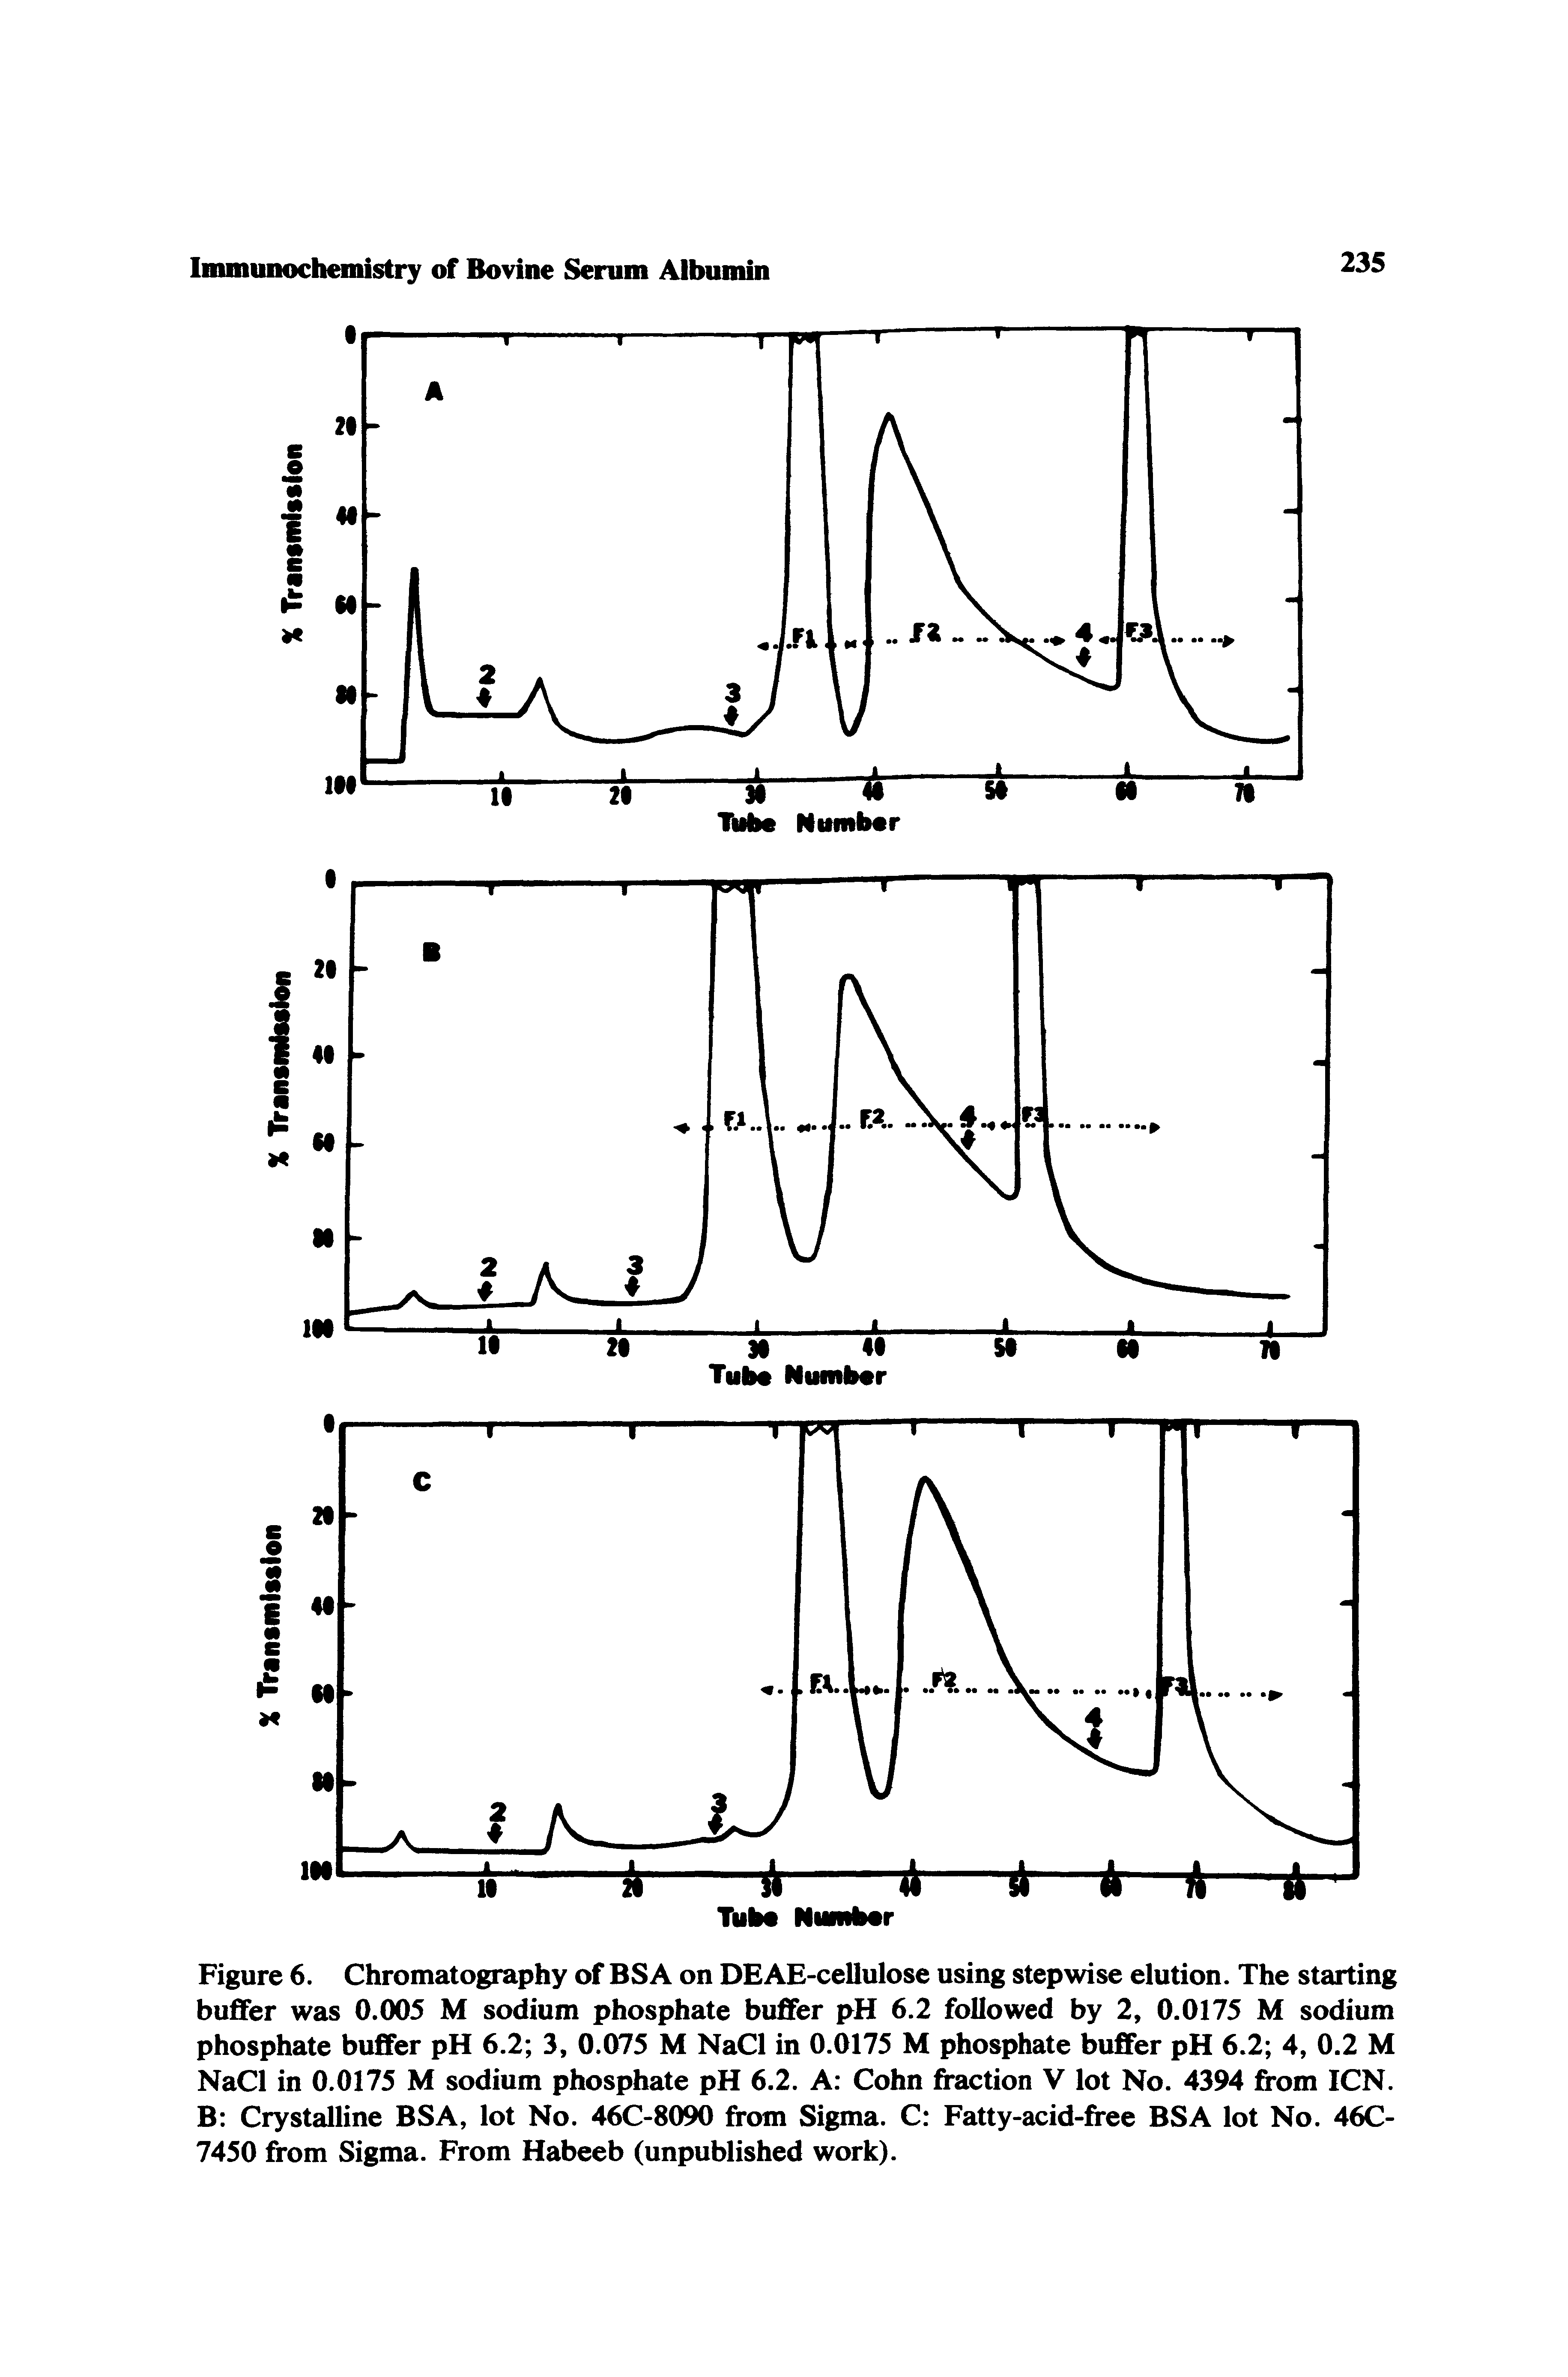 Figure 6. Chromatography of BSA on DEAE-cellulose using stepwise elution. The starting buffer was 0.005 M sodium phosphate buffer pH 6.2 followed by 2, 0.0175 M sodium phosphate buffer pH 6.2 3, 0.075 M NaCl in 0.0175 M phosphate buffer pH 6.2 4, 0.2 M NaCl in 0.0175 M sodium phosphate pH 6.2. A Cohn fraction V lot No. 4394 from ICN. B Crystalline BSA, lot No. 46C-8090 from Sigma. C Fatty-acid-free BSA lot No. 46C-7450 from Sigma. From Habeeb (unpublished work).